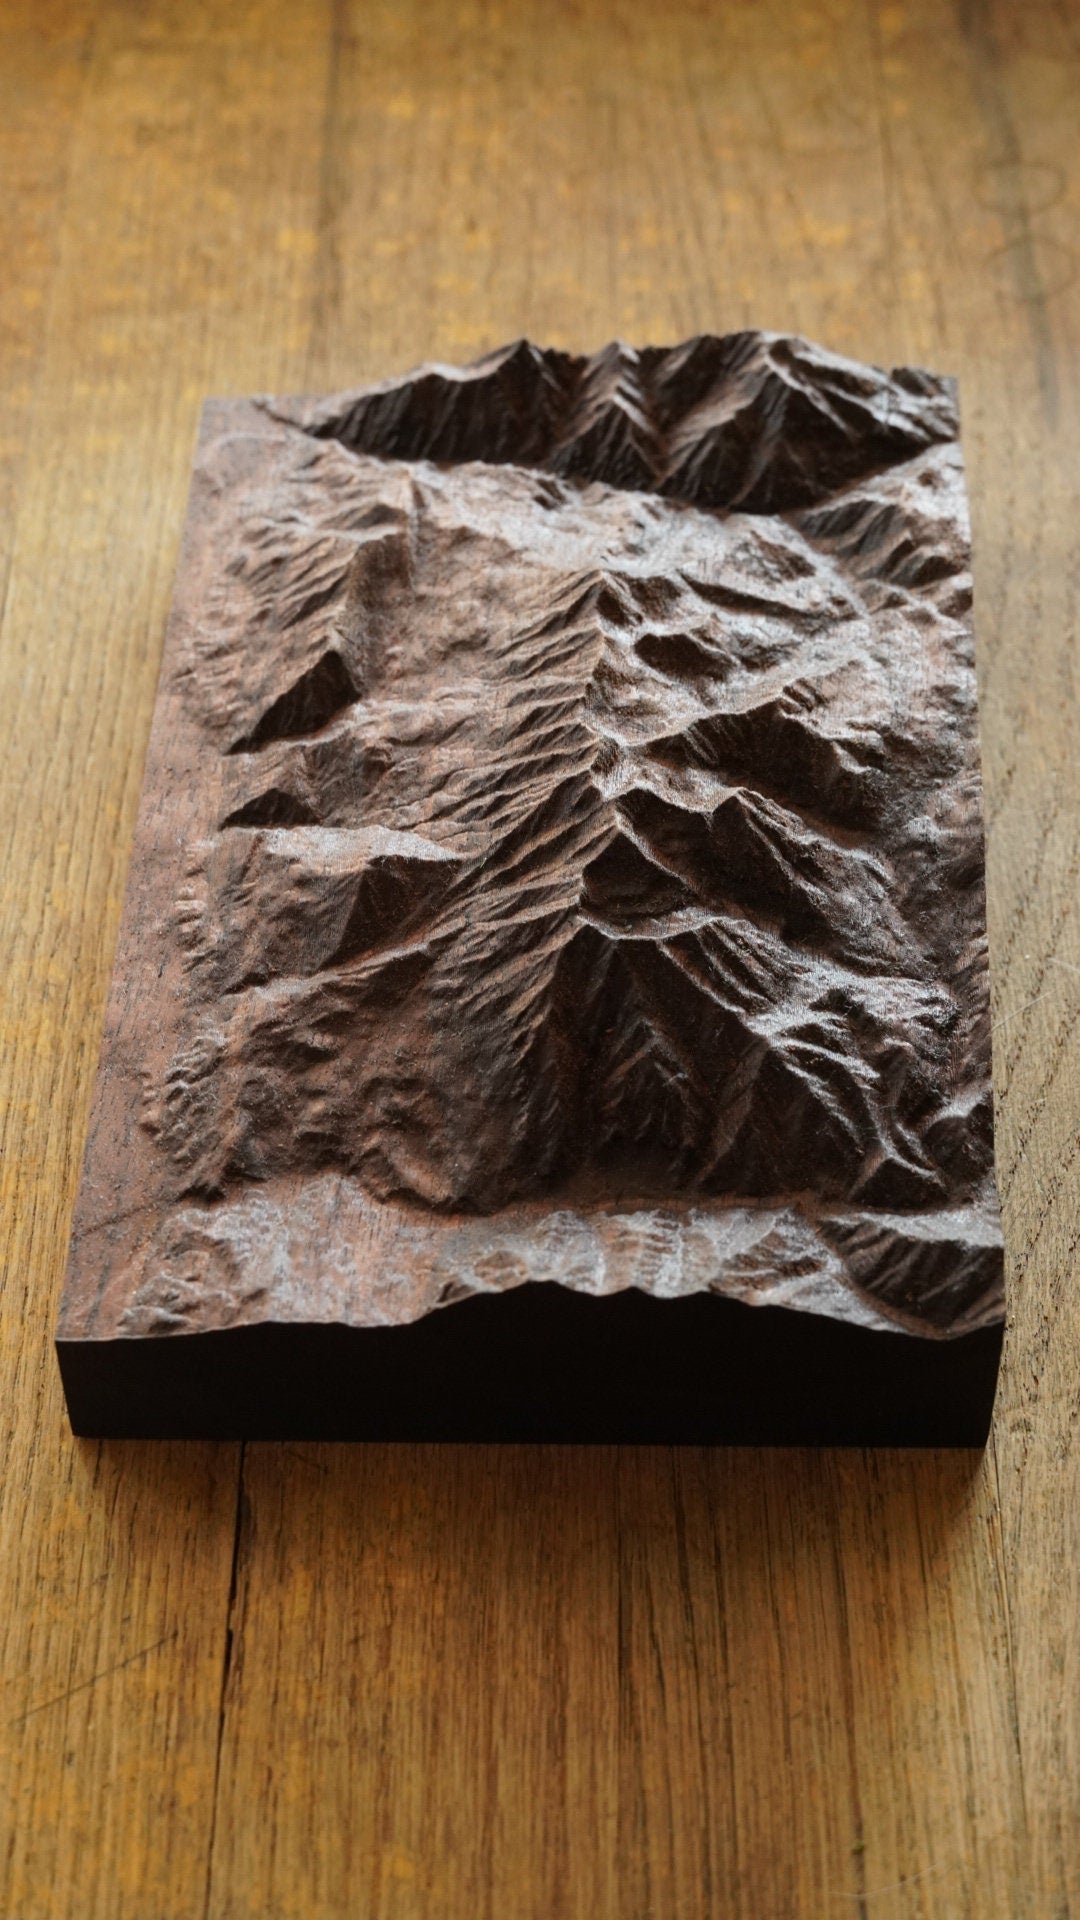 Mount Timpanogos Wooden Relief 3D Map | Topographic Map | Housewarming Gift